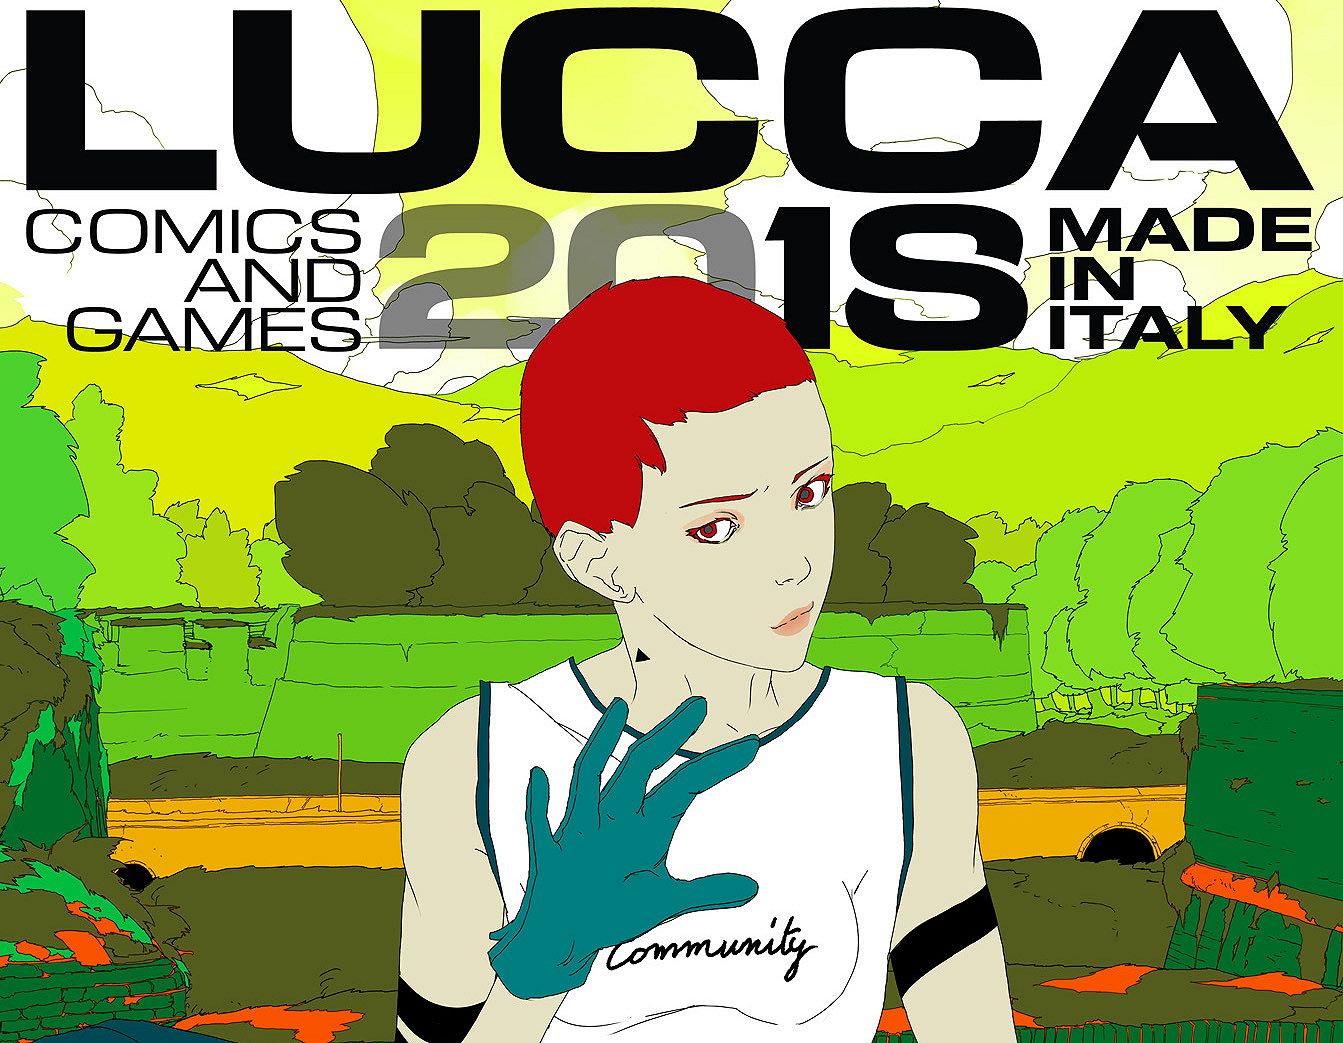 All the activities and guests of Lucca Comics & Games 2018